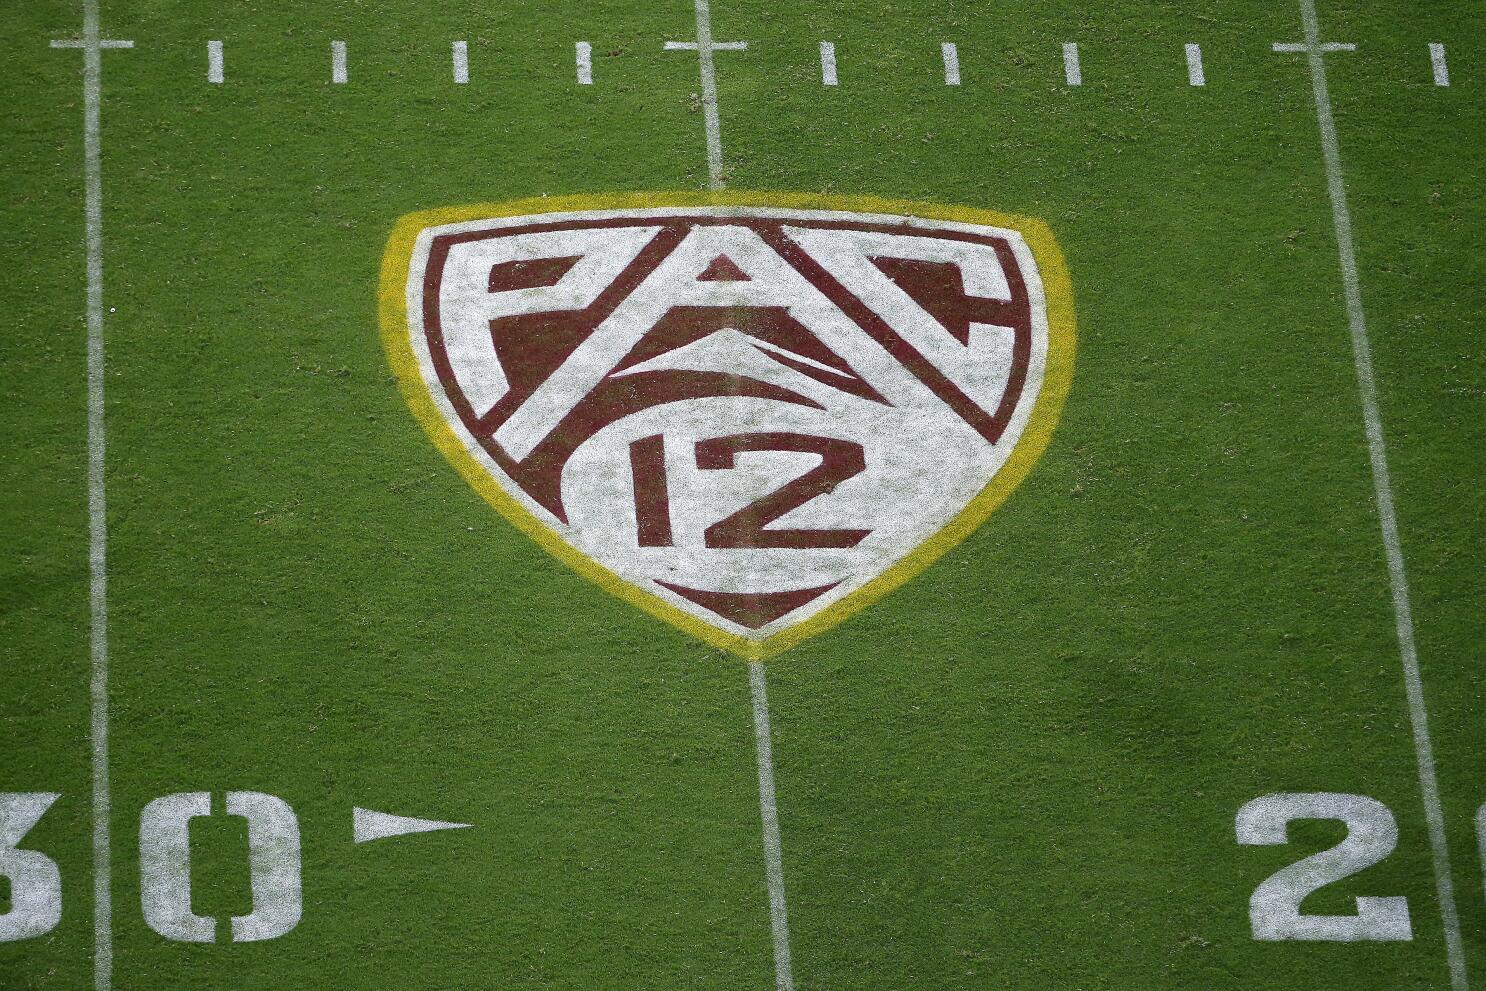 Q&A: The downfall of the Pac-12: How did we get here? - Los